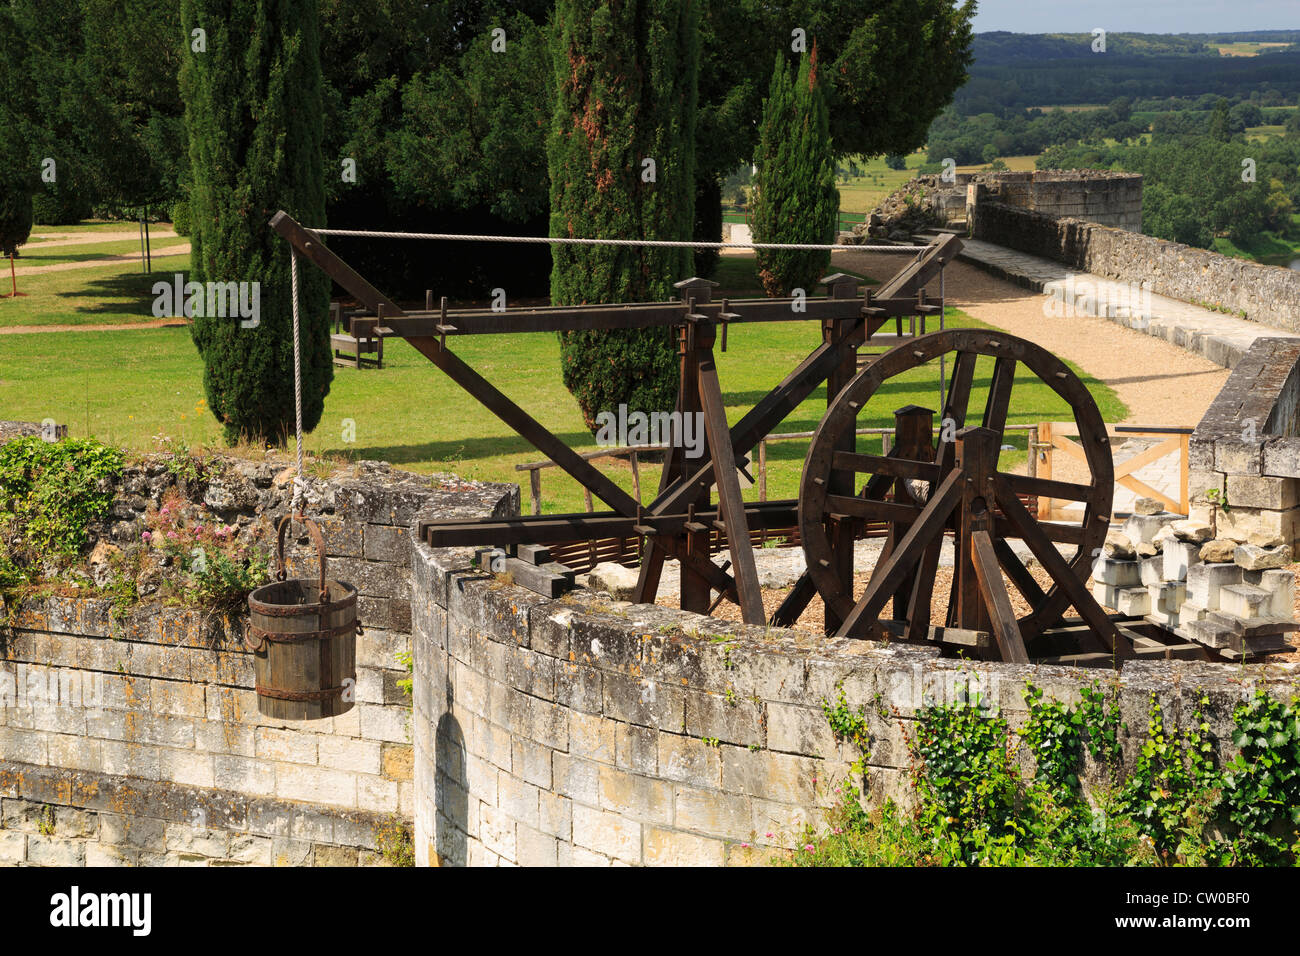 Lifting machine, Chinon, Loire Valley, France, Replica of a machine used to lift building materials in medieval times. Stock Photo